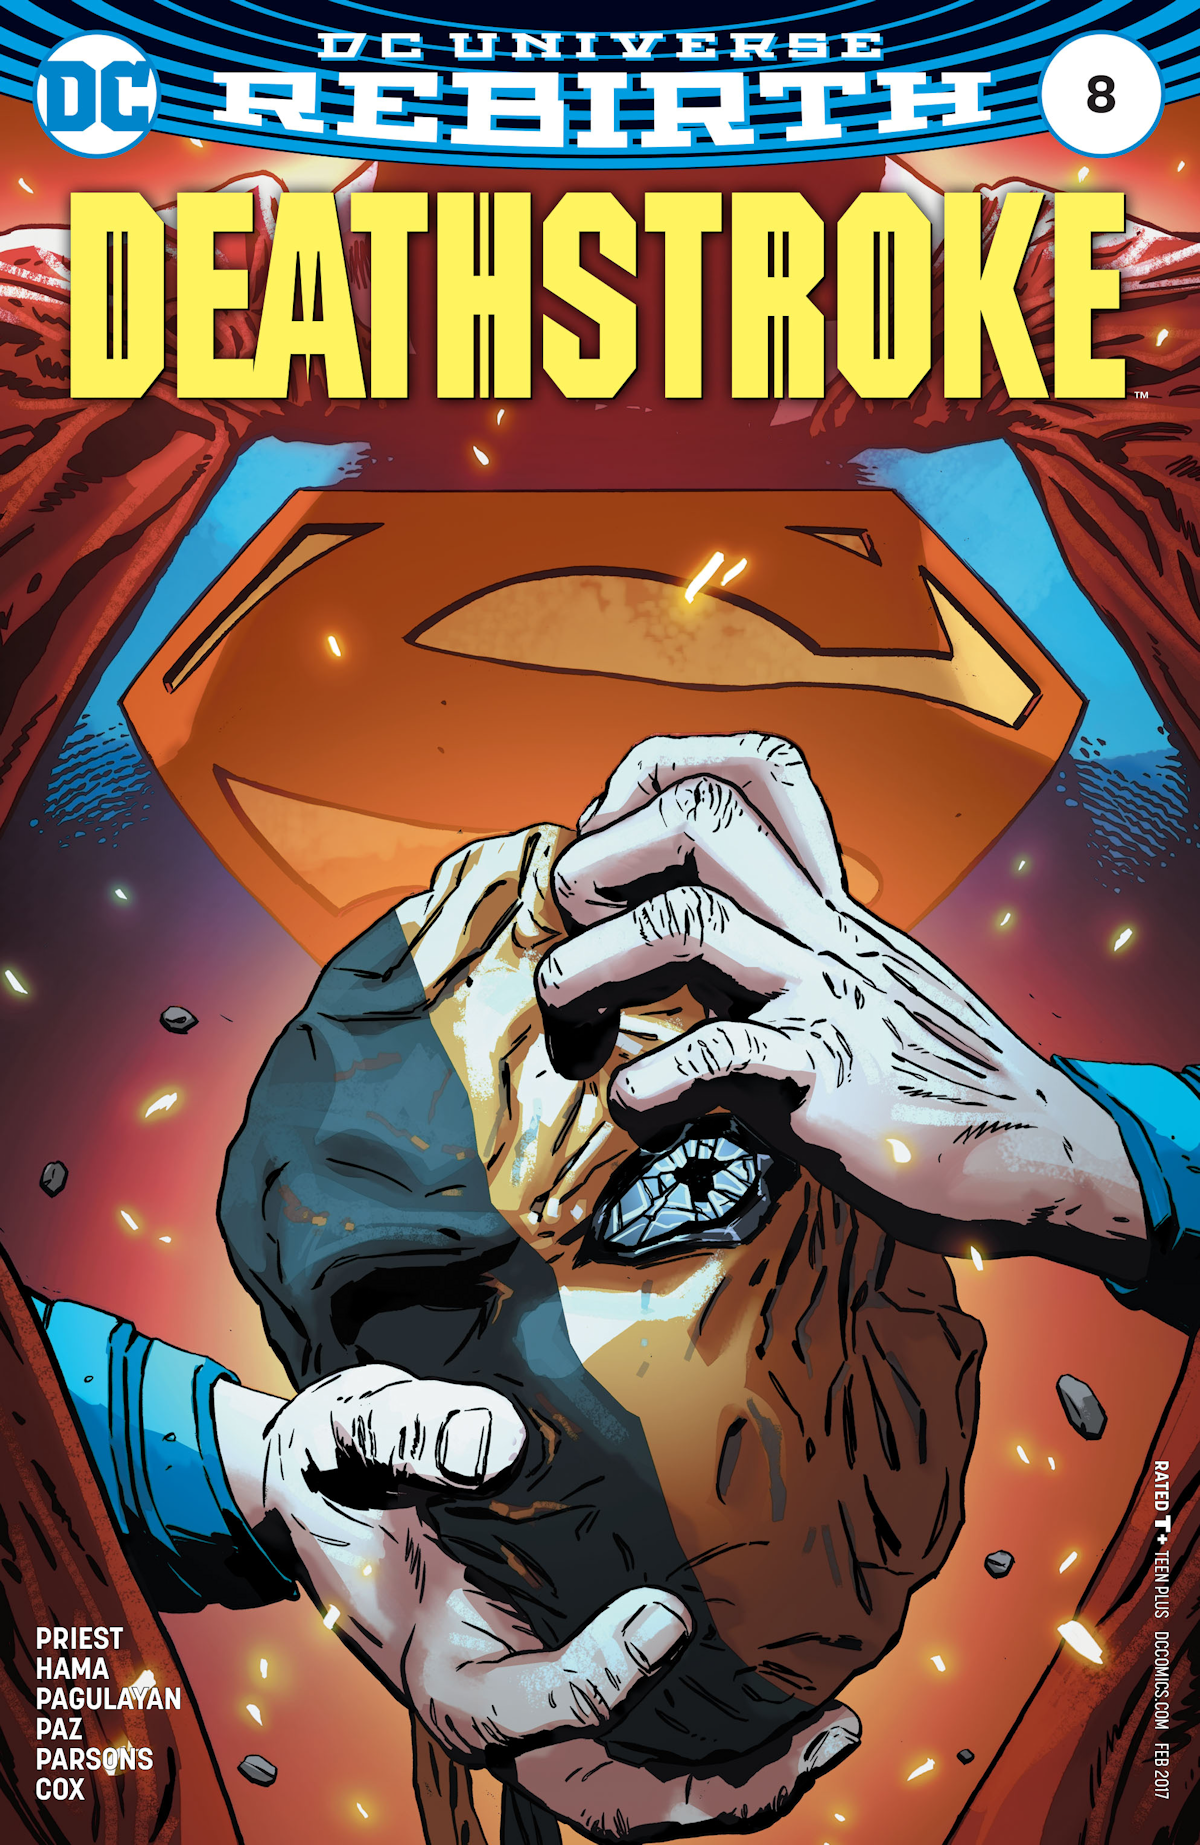 Deathstroke Vol. 4 8 (Cover A)